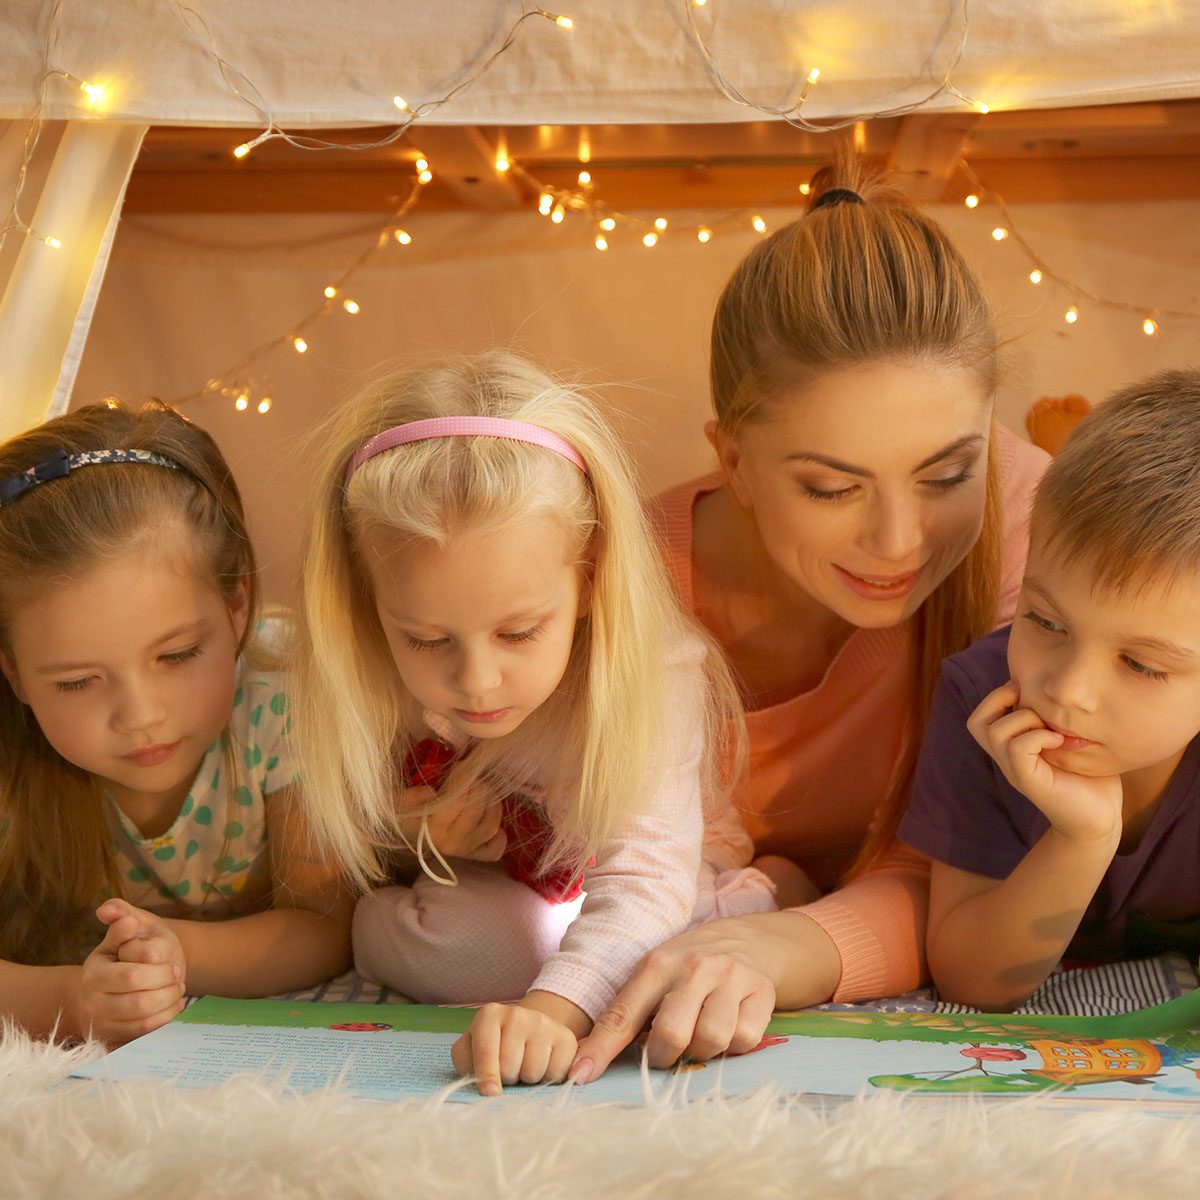 Young woman and cute children reading book in hovel at home; Shutterstock ID 598451210; Job (TFH, TOH, RD, BNB, CWM, CM): TOH